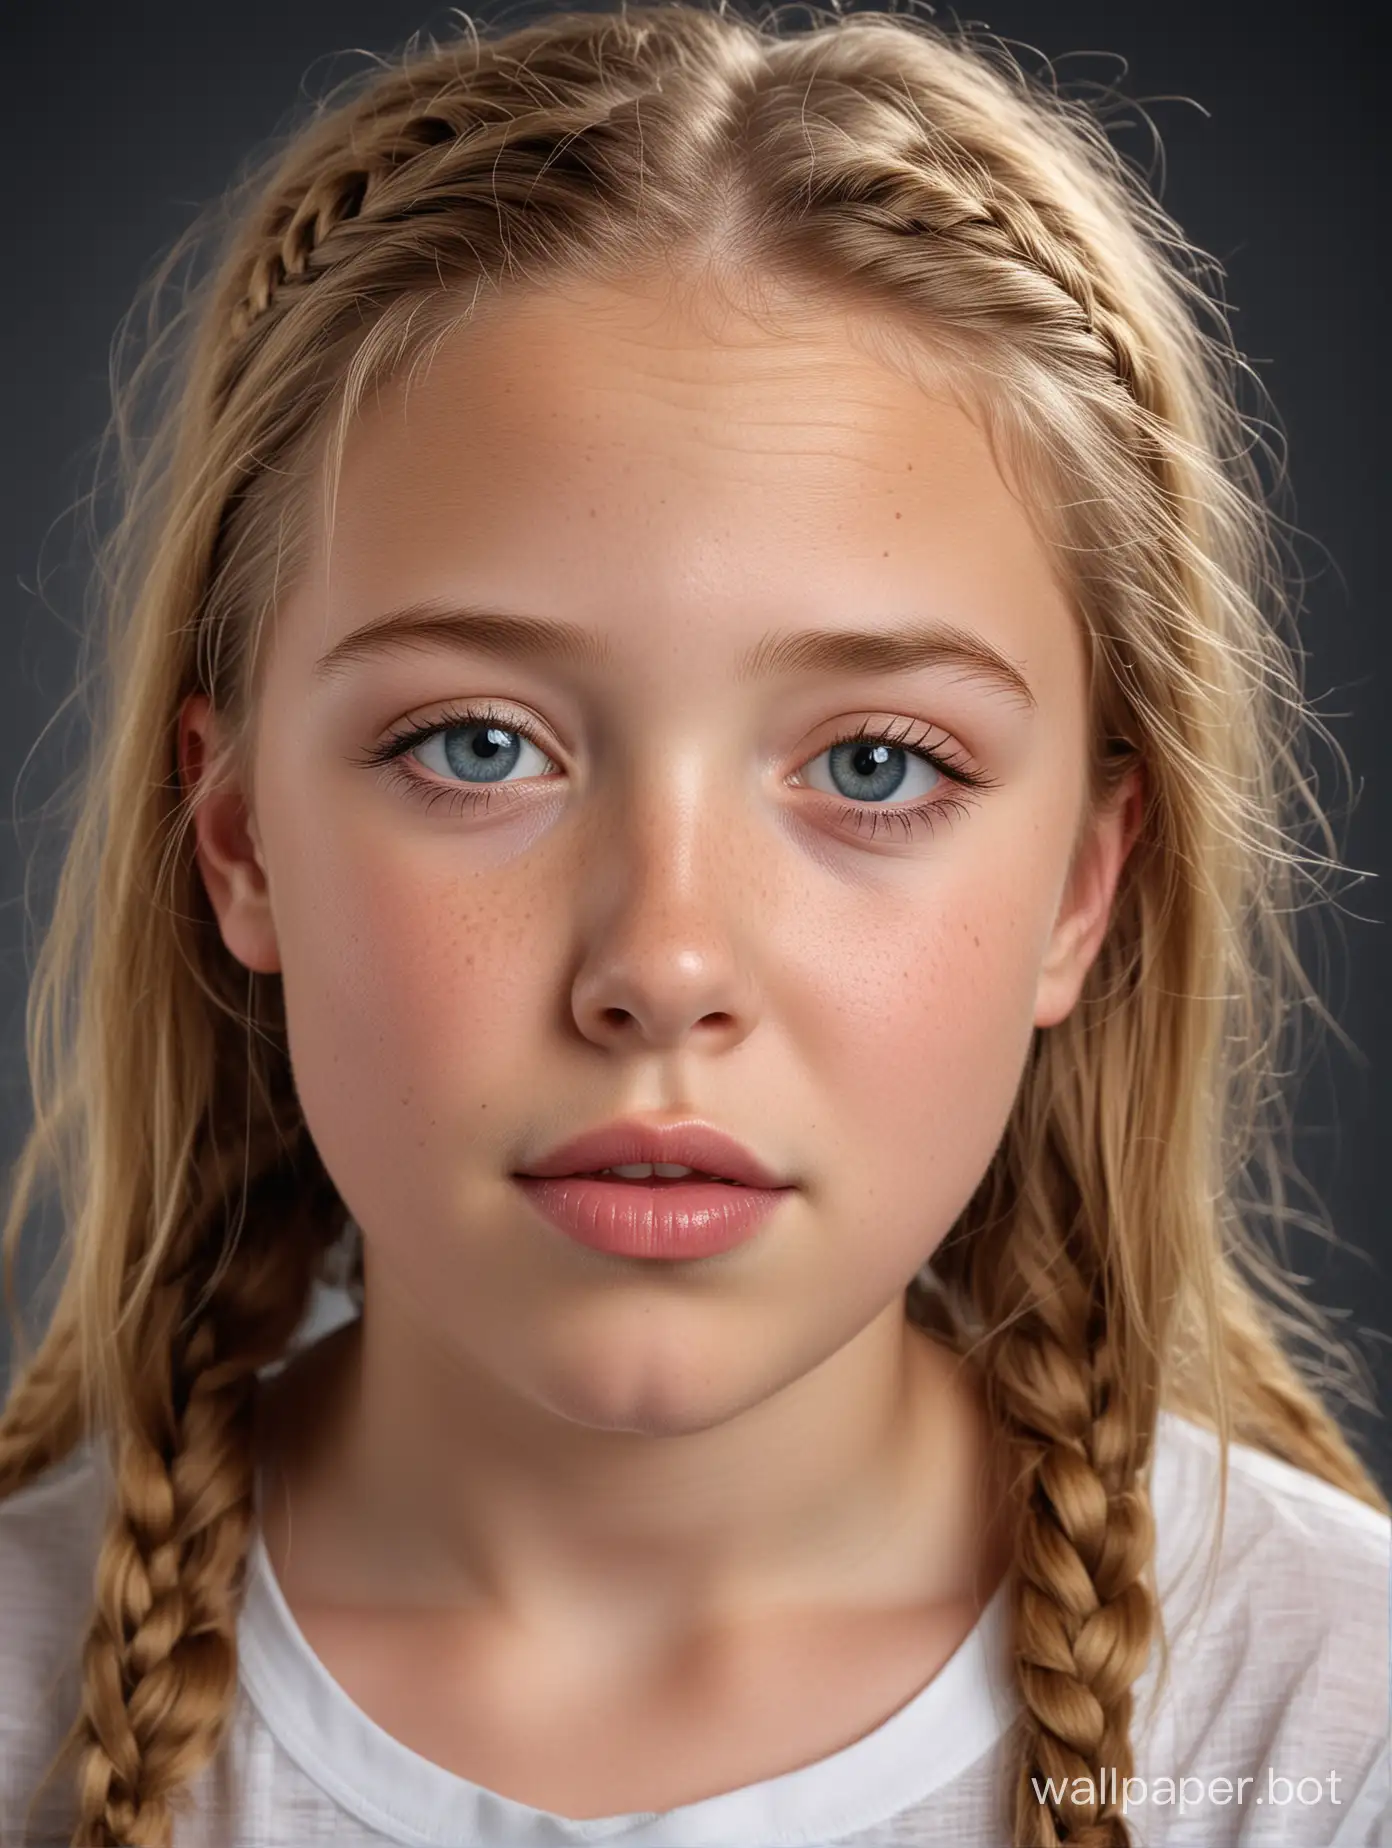 Professional studio portrait photograph with the most intricate detail. A beautiful little 10 year old preteen Caucasian girl. She has a perfect most gorgeous alluring little preteen child face, blue eyes, slight freckles, ginger blonde braided hair. She looks almost engelic in her beauty. Serious surprised expression. Very thin pouting lips. Kissing lips with tip of tongue. She has a perfect little preteen child body, short stocky stature, tiniest little flat undeveloped preteen child breasts, puffy nipples, slender waist, round broad hips, curvy thighs.